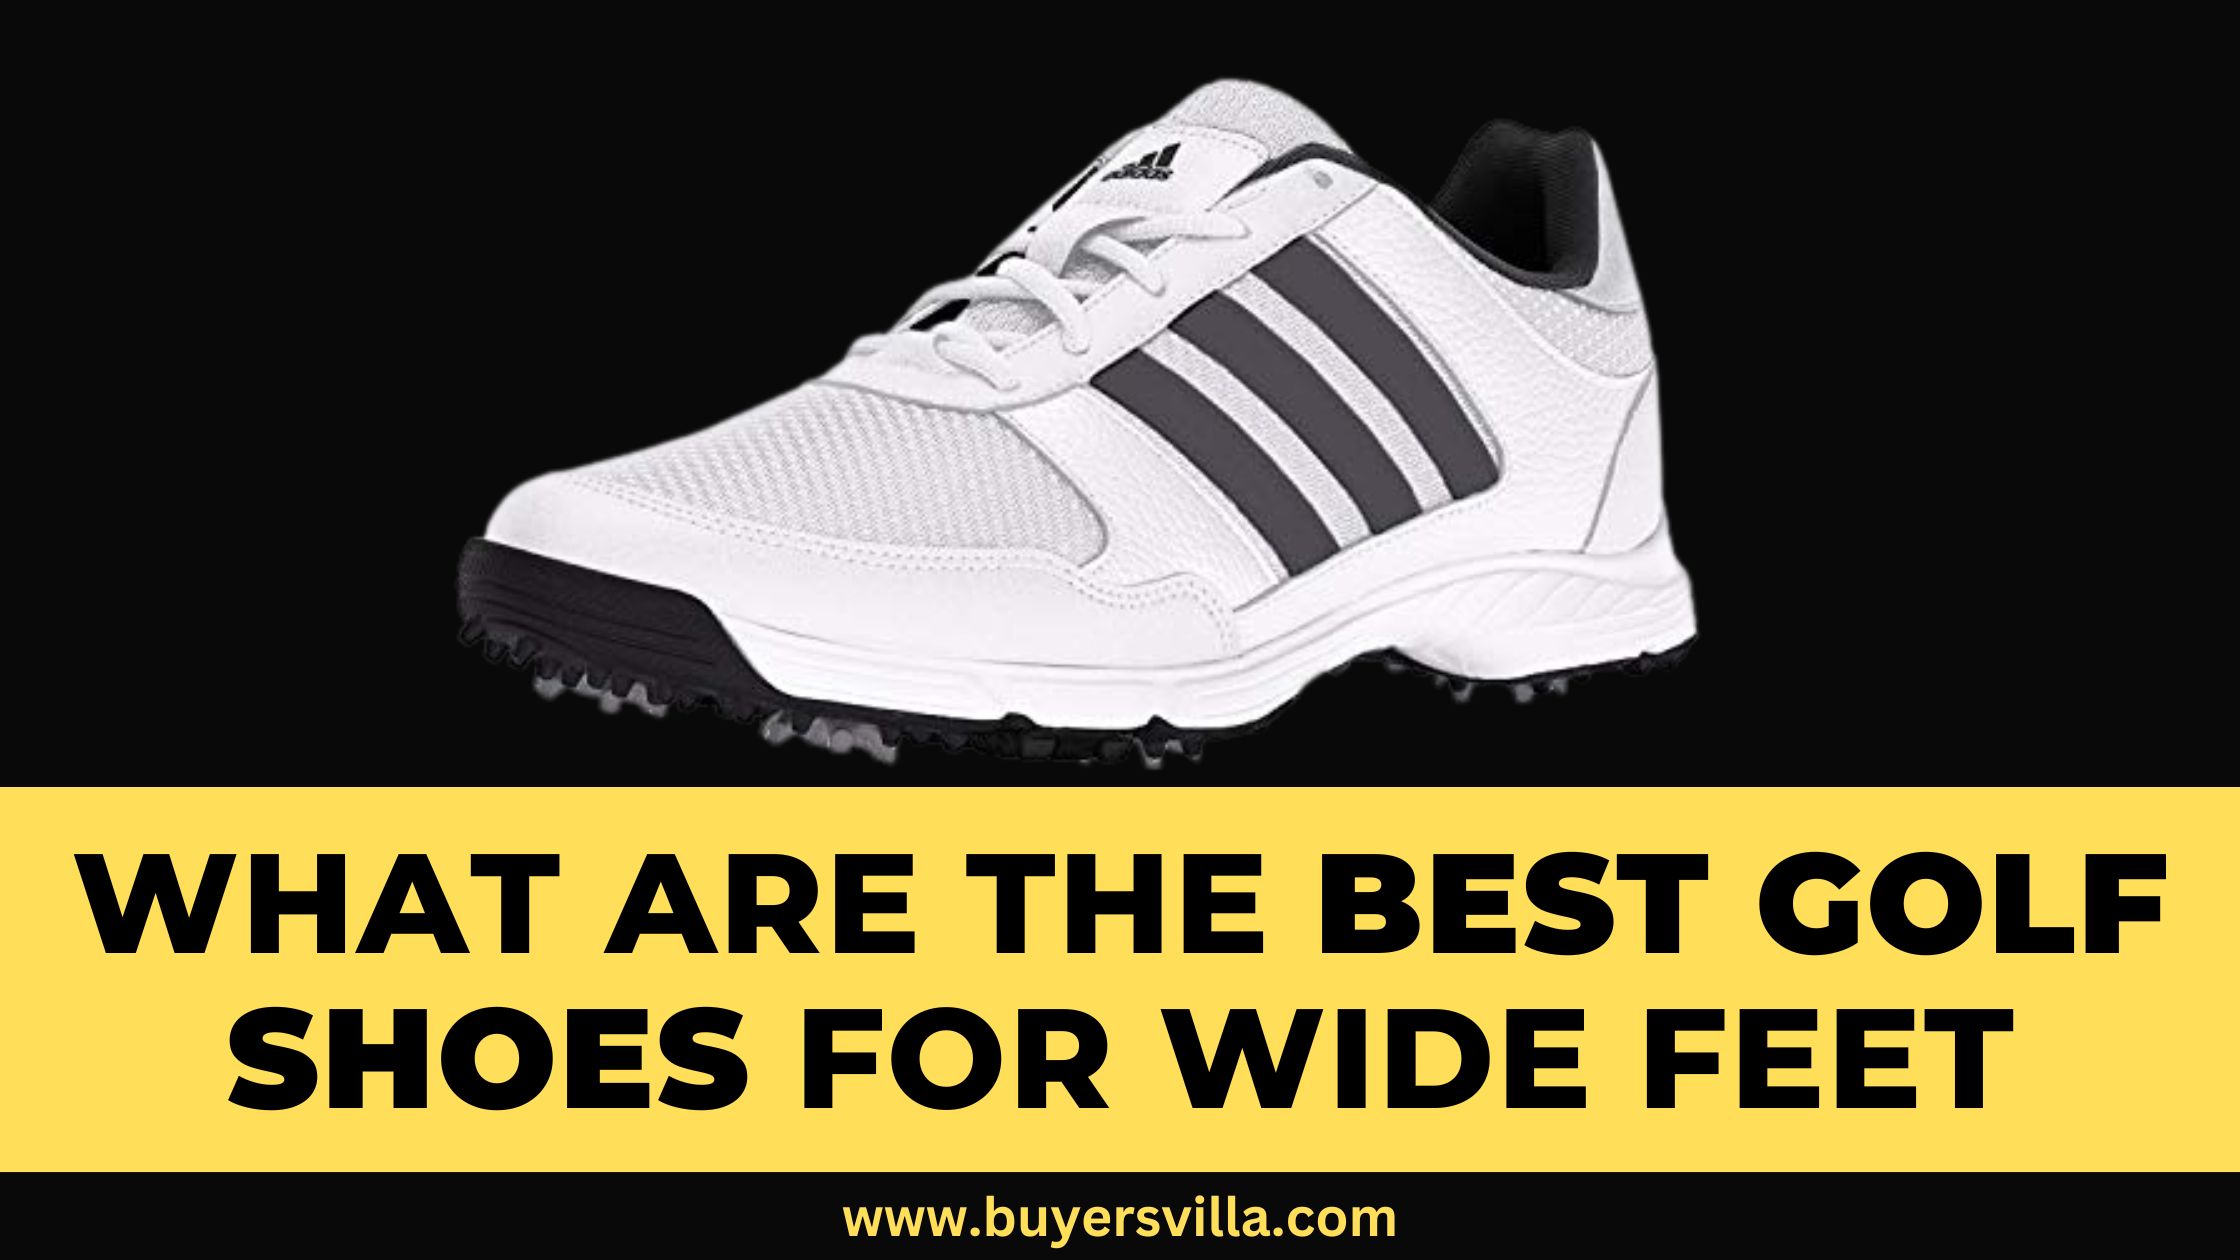 What are the Best Golf Shoes for Wide Feet